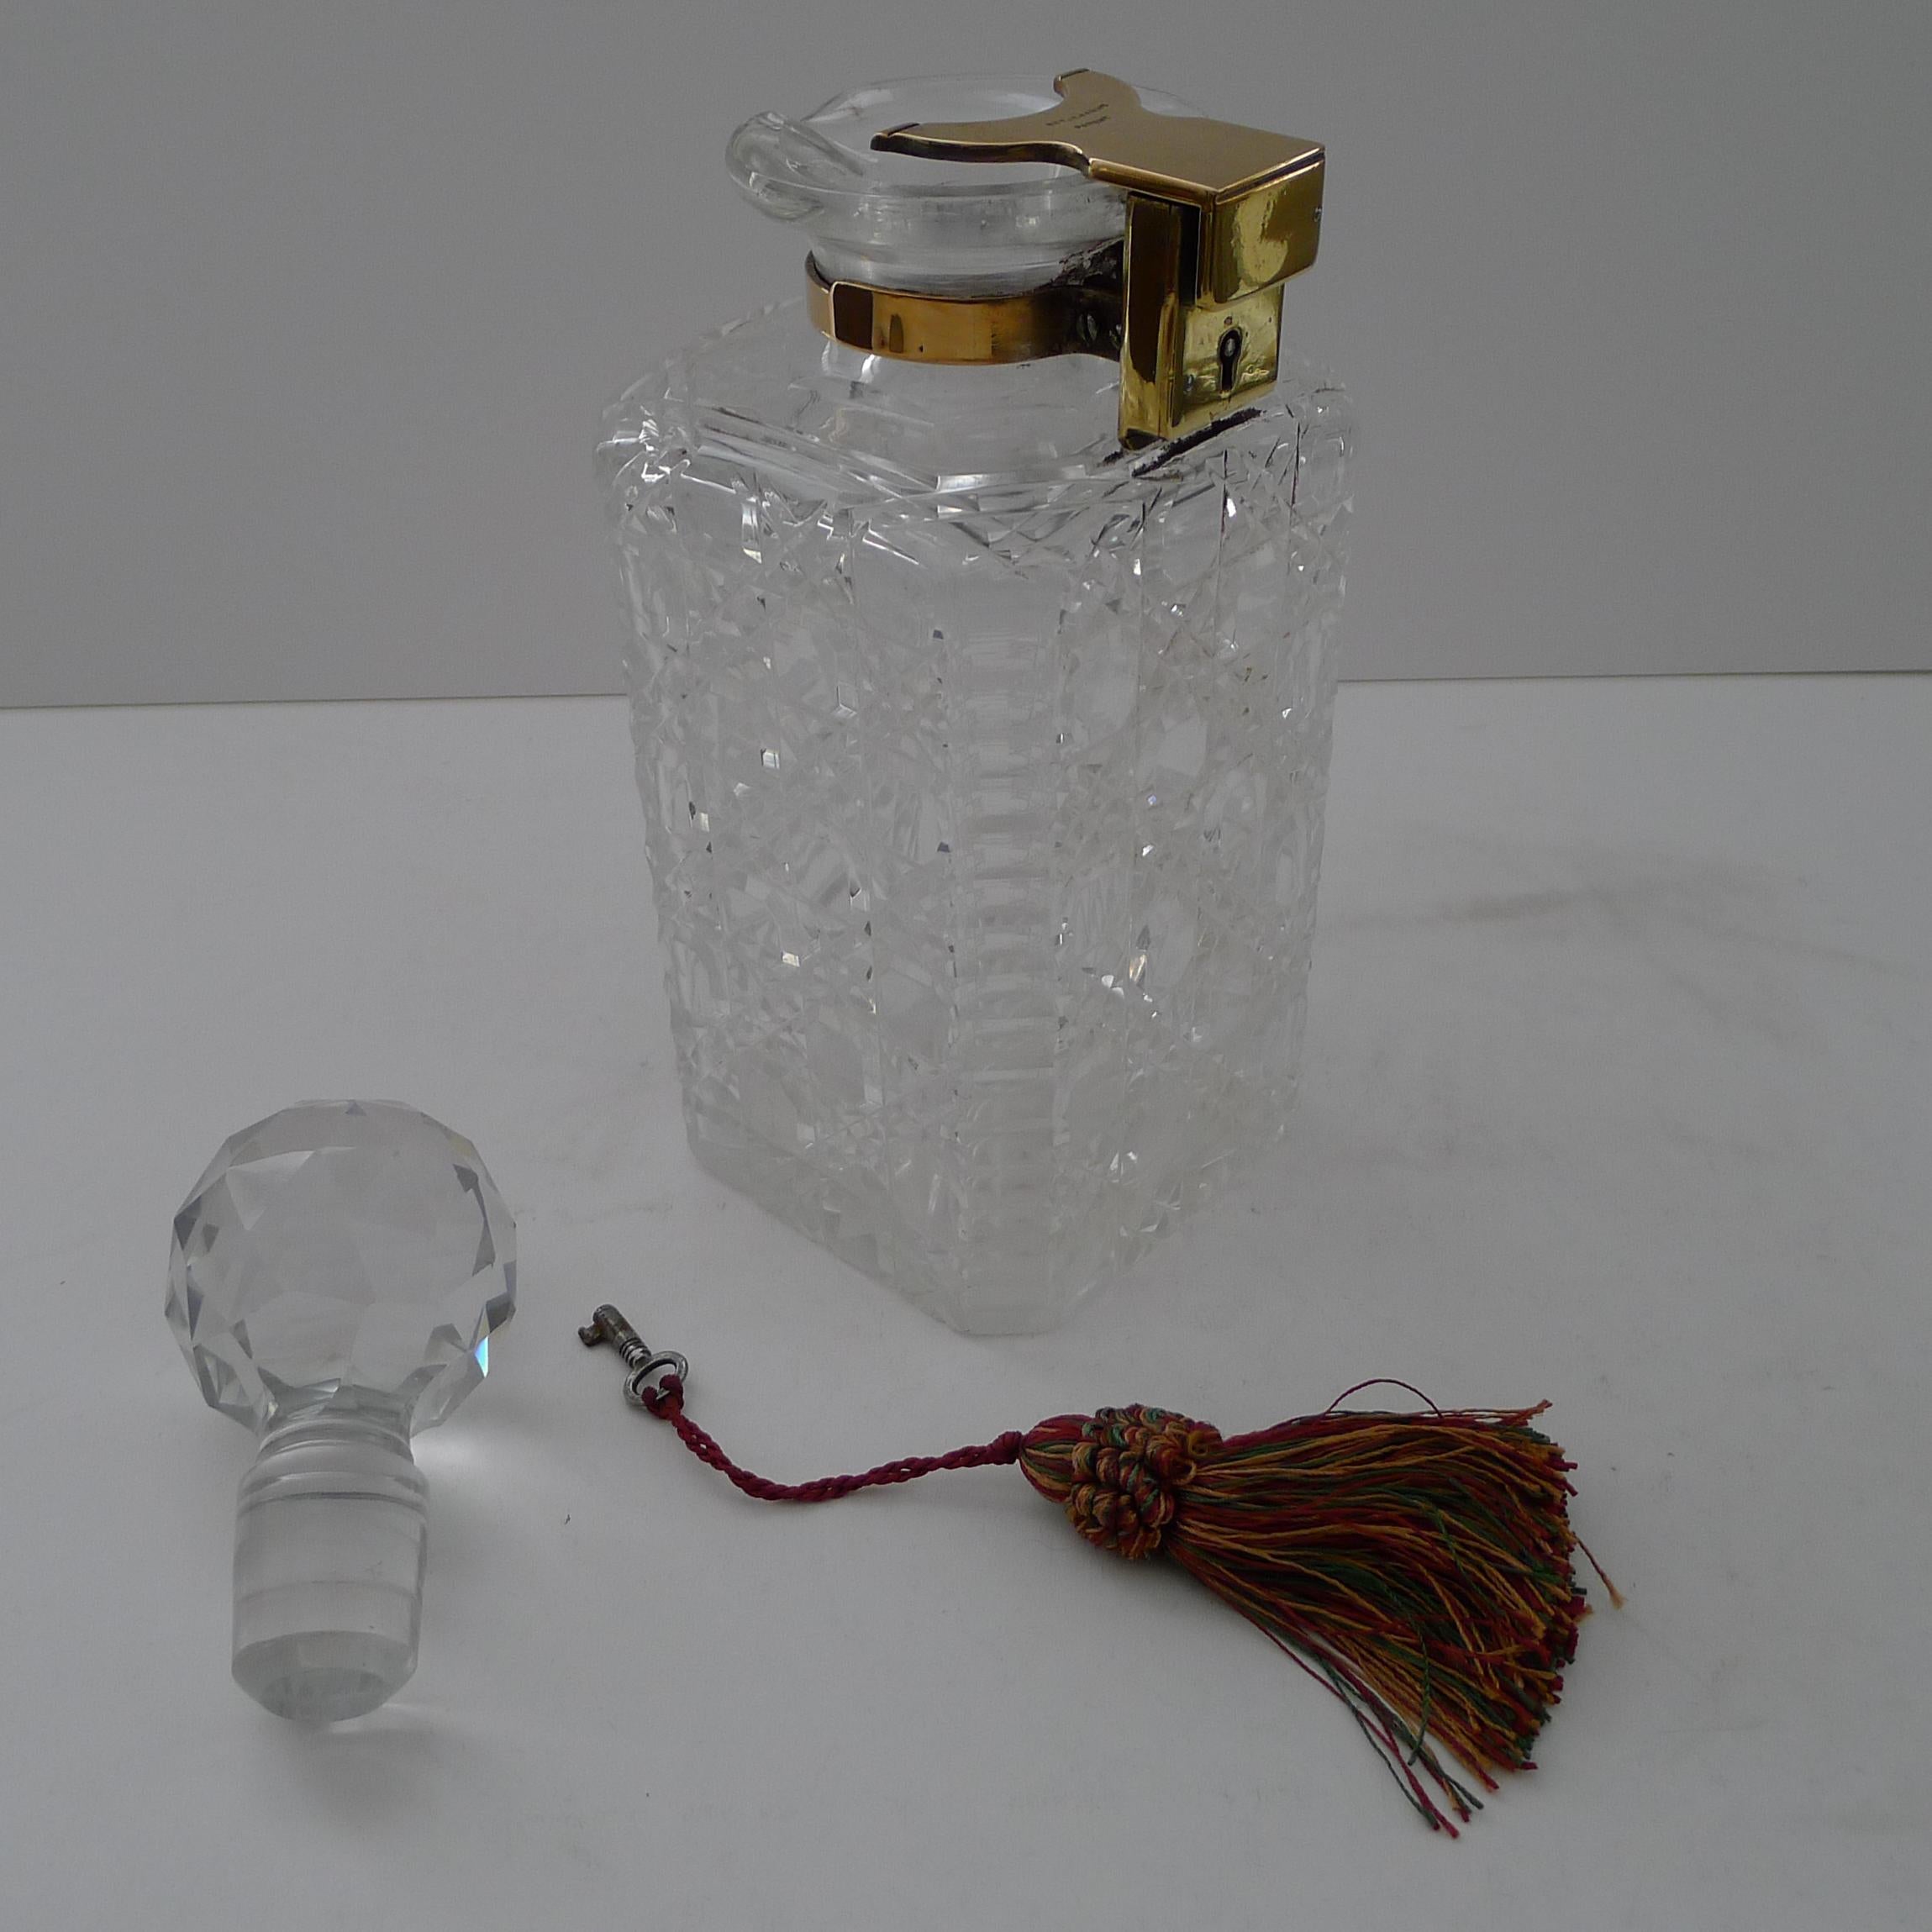 A stunning hefty cut glass decanter in the ever-popular hobnail design with cantered corners with a horizontal cut, the underside withe a star cut.

The neck incorporates a pouring spout and holds the original stopper.  The stopper is kept locked